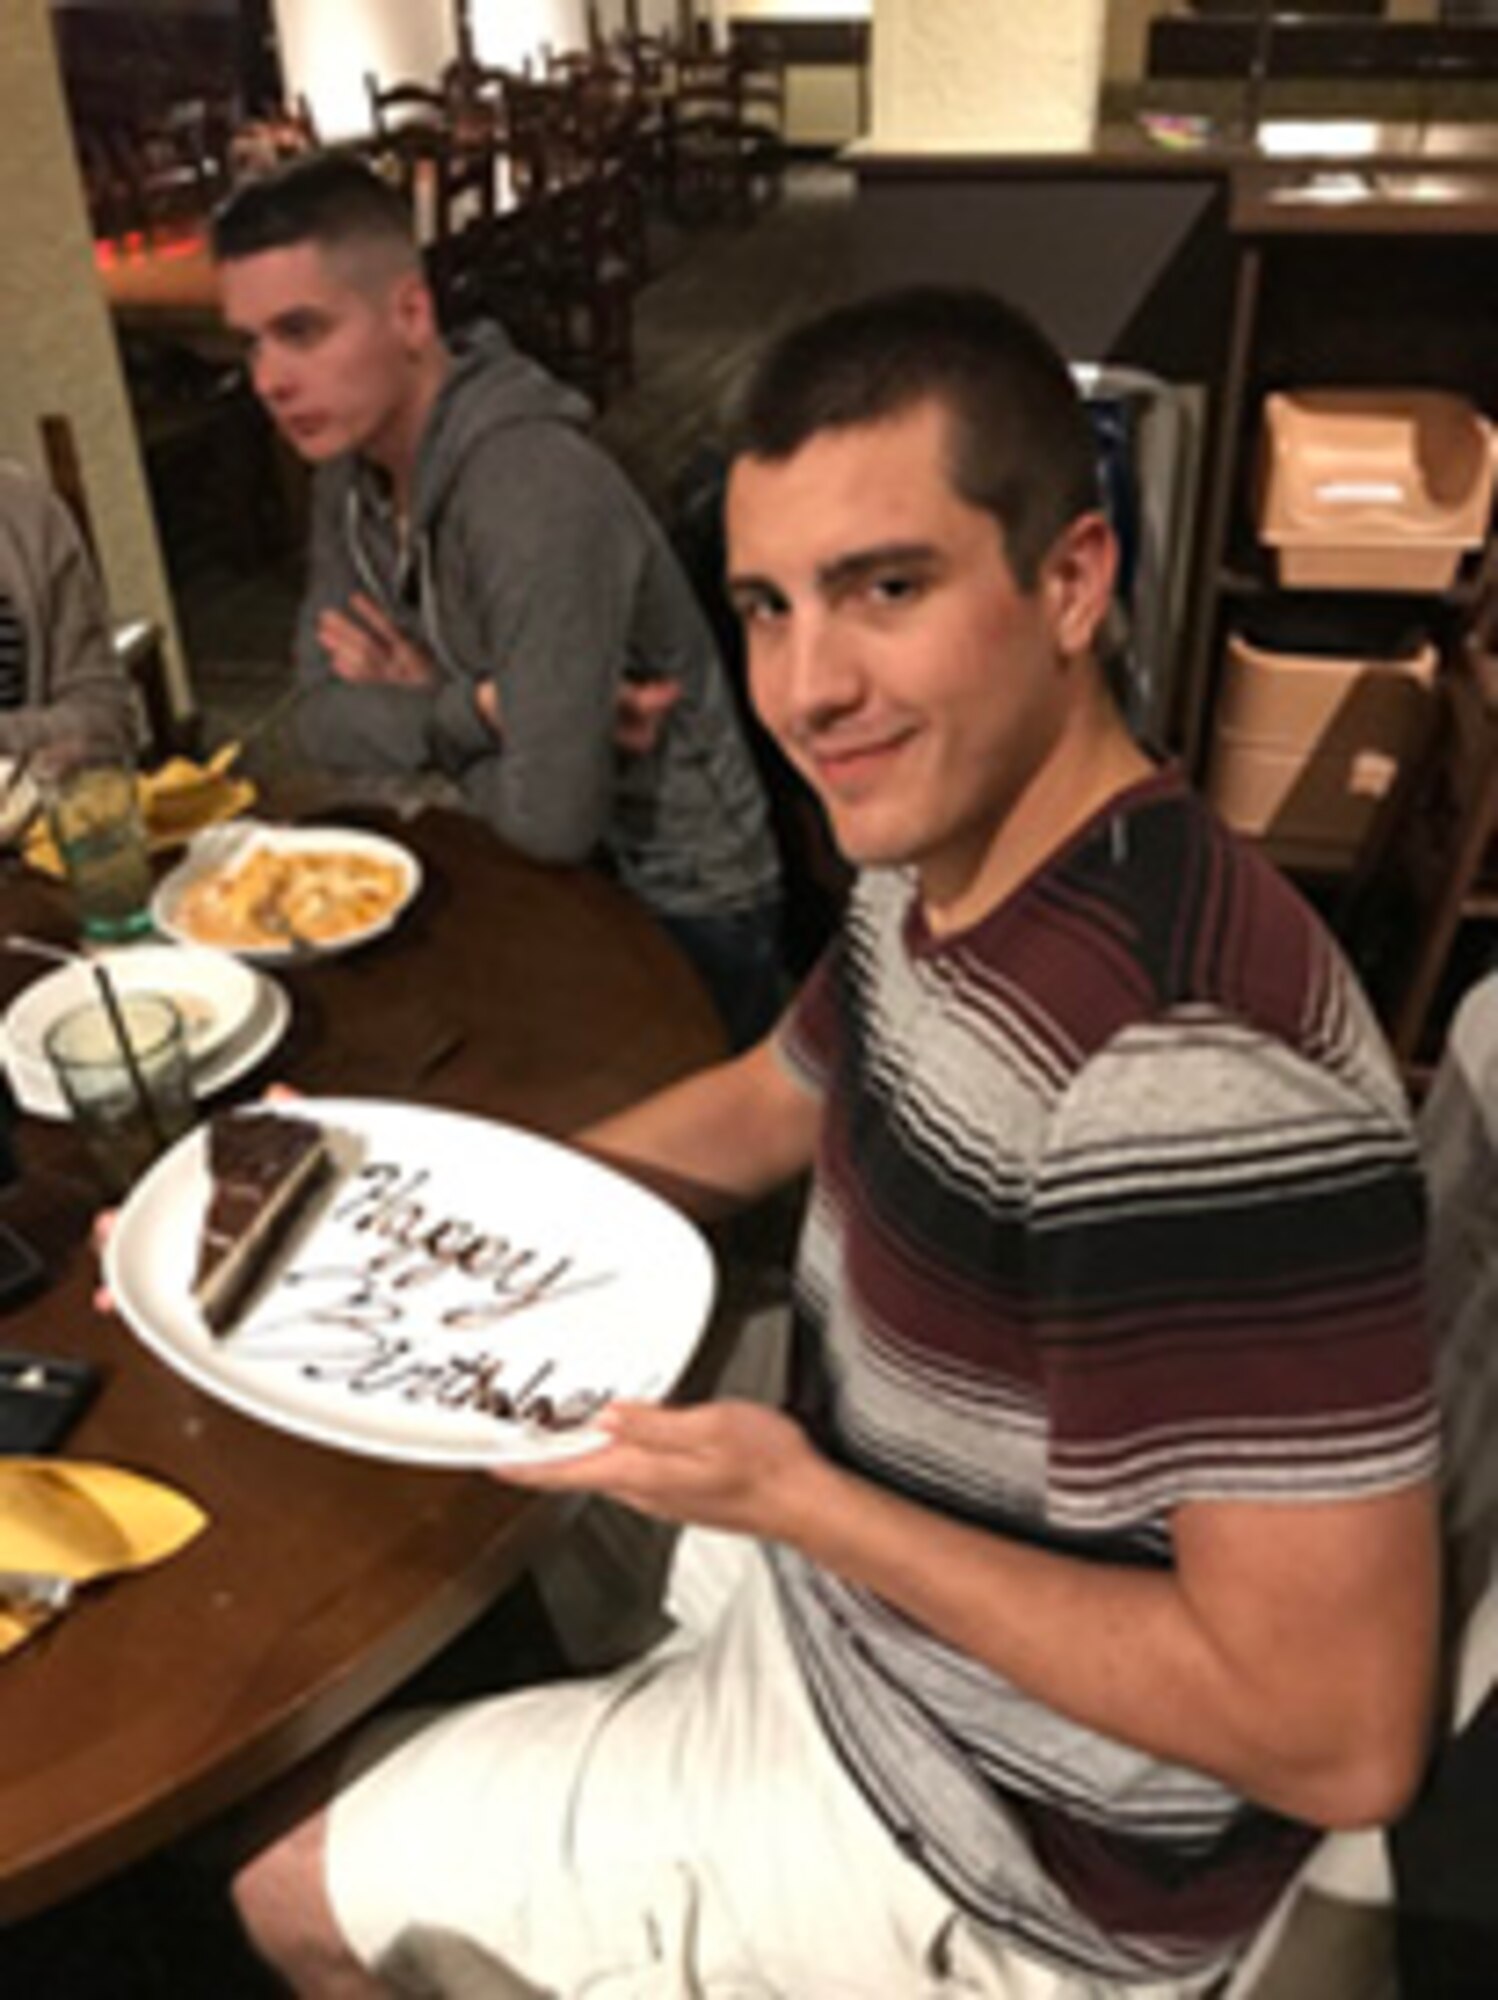 From left, Team Tinker Home Away from Home participants and cousins, Staff Sgt. Andrew “Andy” Roach and Senior Airman Jacob Roach celebrate Jacob’s birthday with their host family.